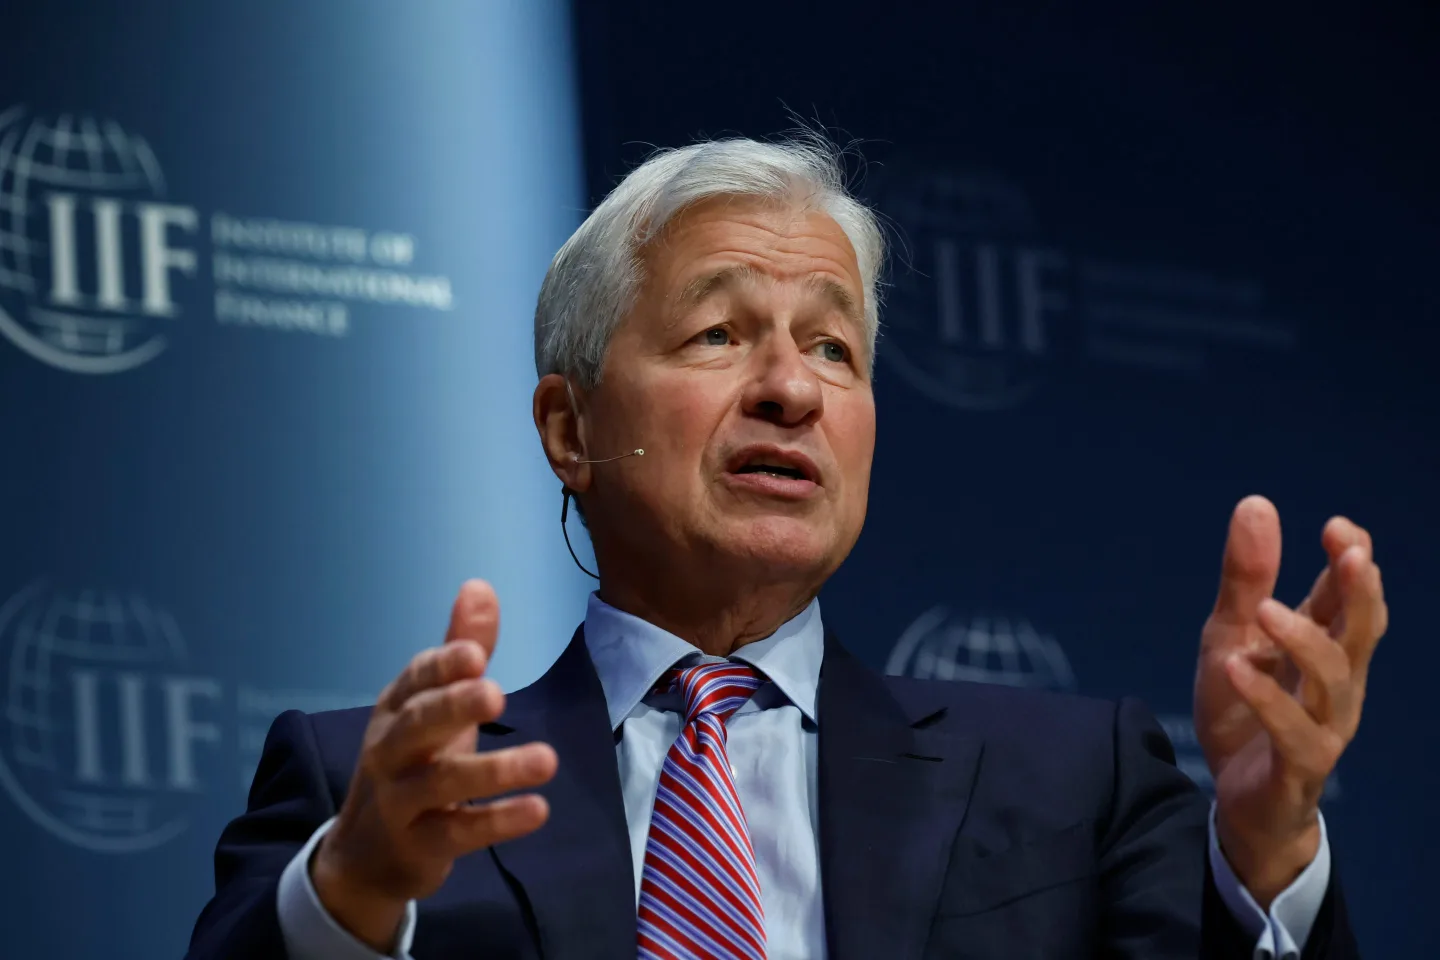 Here He Goes Again - Bitcoin is ‘Hyped-Up Fraud’ Says JPMorgan’s Jamie Dimon, But Blockchain is ‘Deployable’